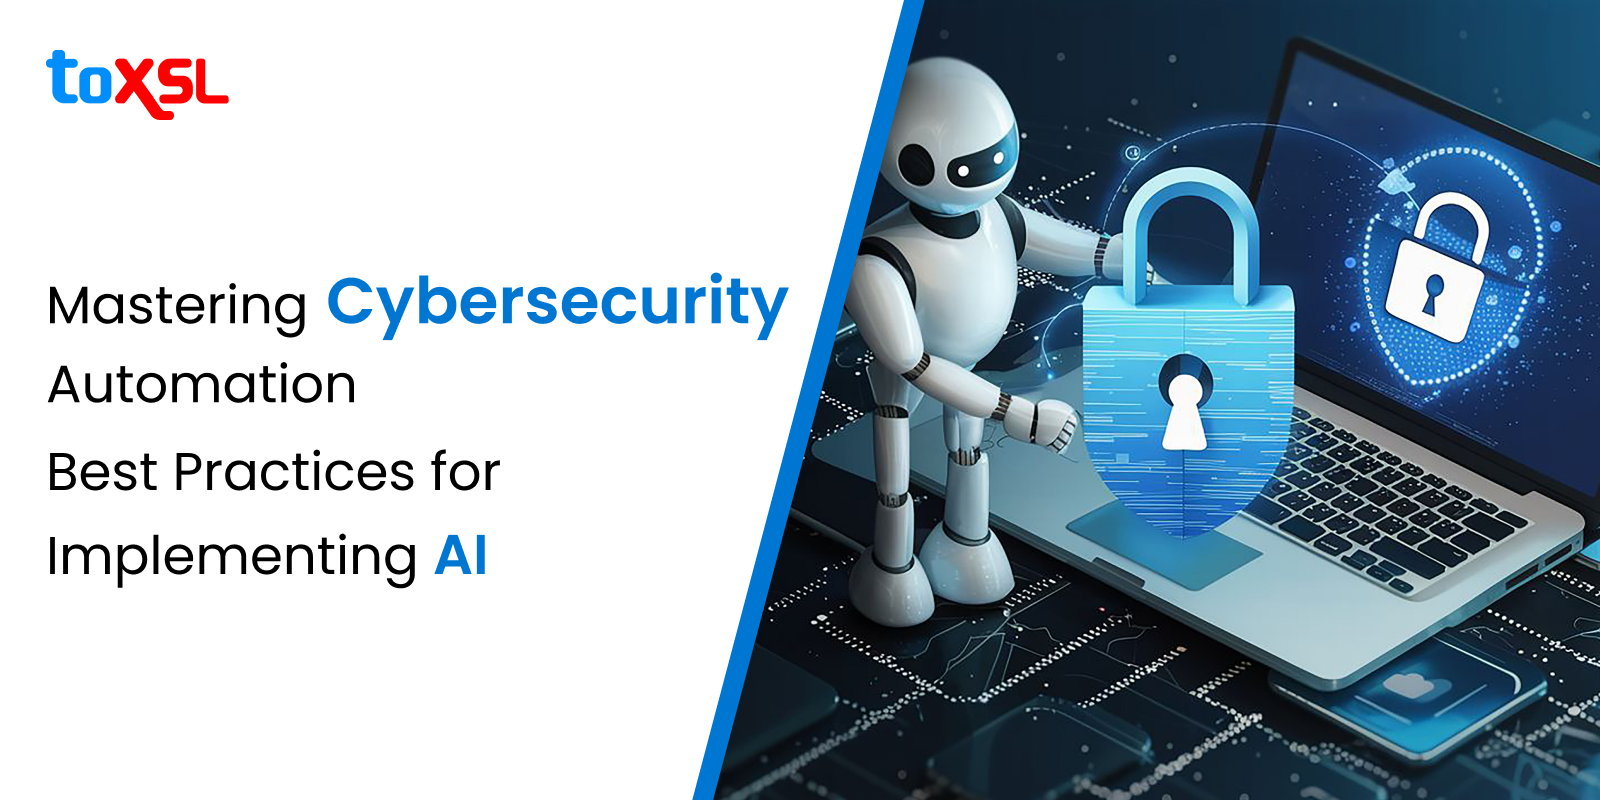 Mastering Cybersecurity Automation: Best Practices for Implementing AI